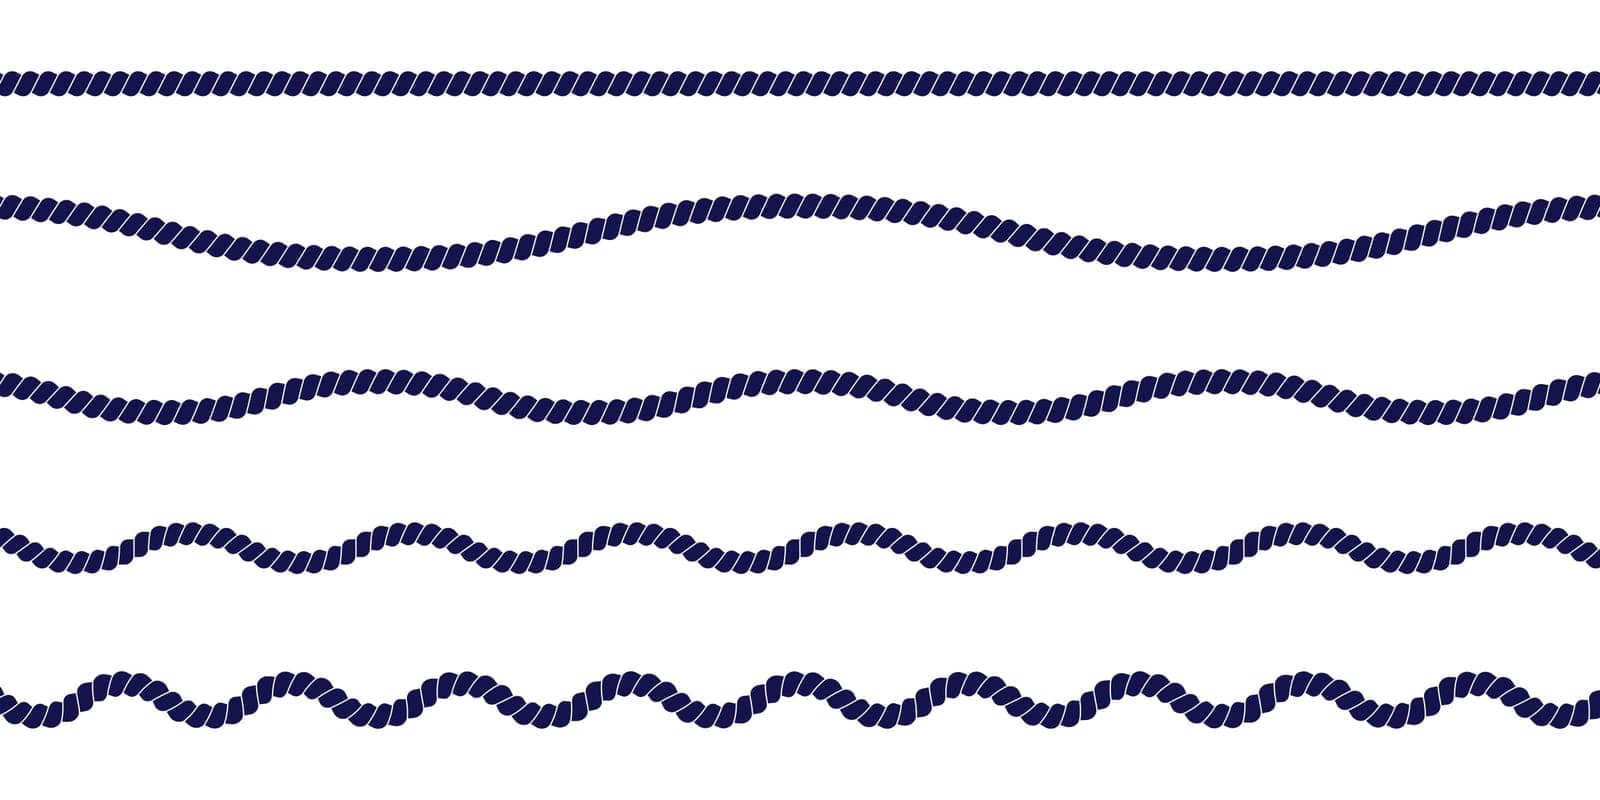 Different straight and wavy rope borders. Cord, thread, cable, twine, jute isolated on white background. Design elements on marine, sailor, yacht, nautical theme. Vector flat illustration by Ablohina